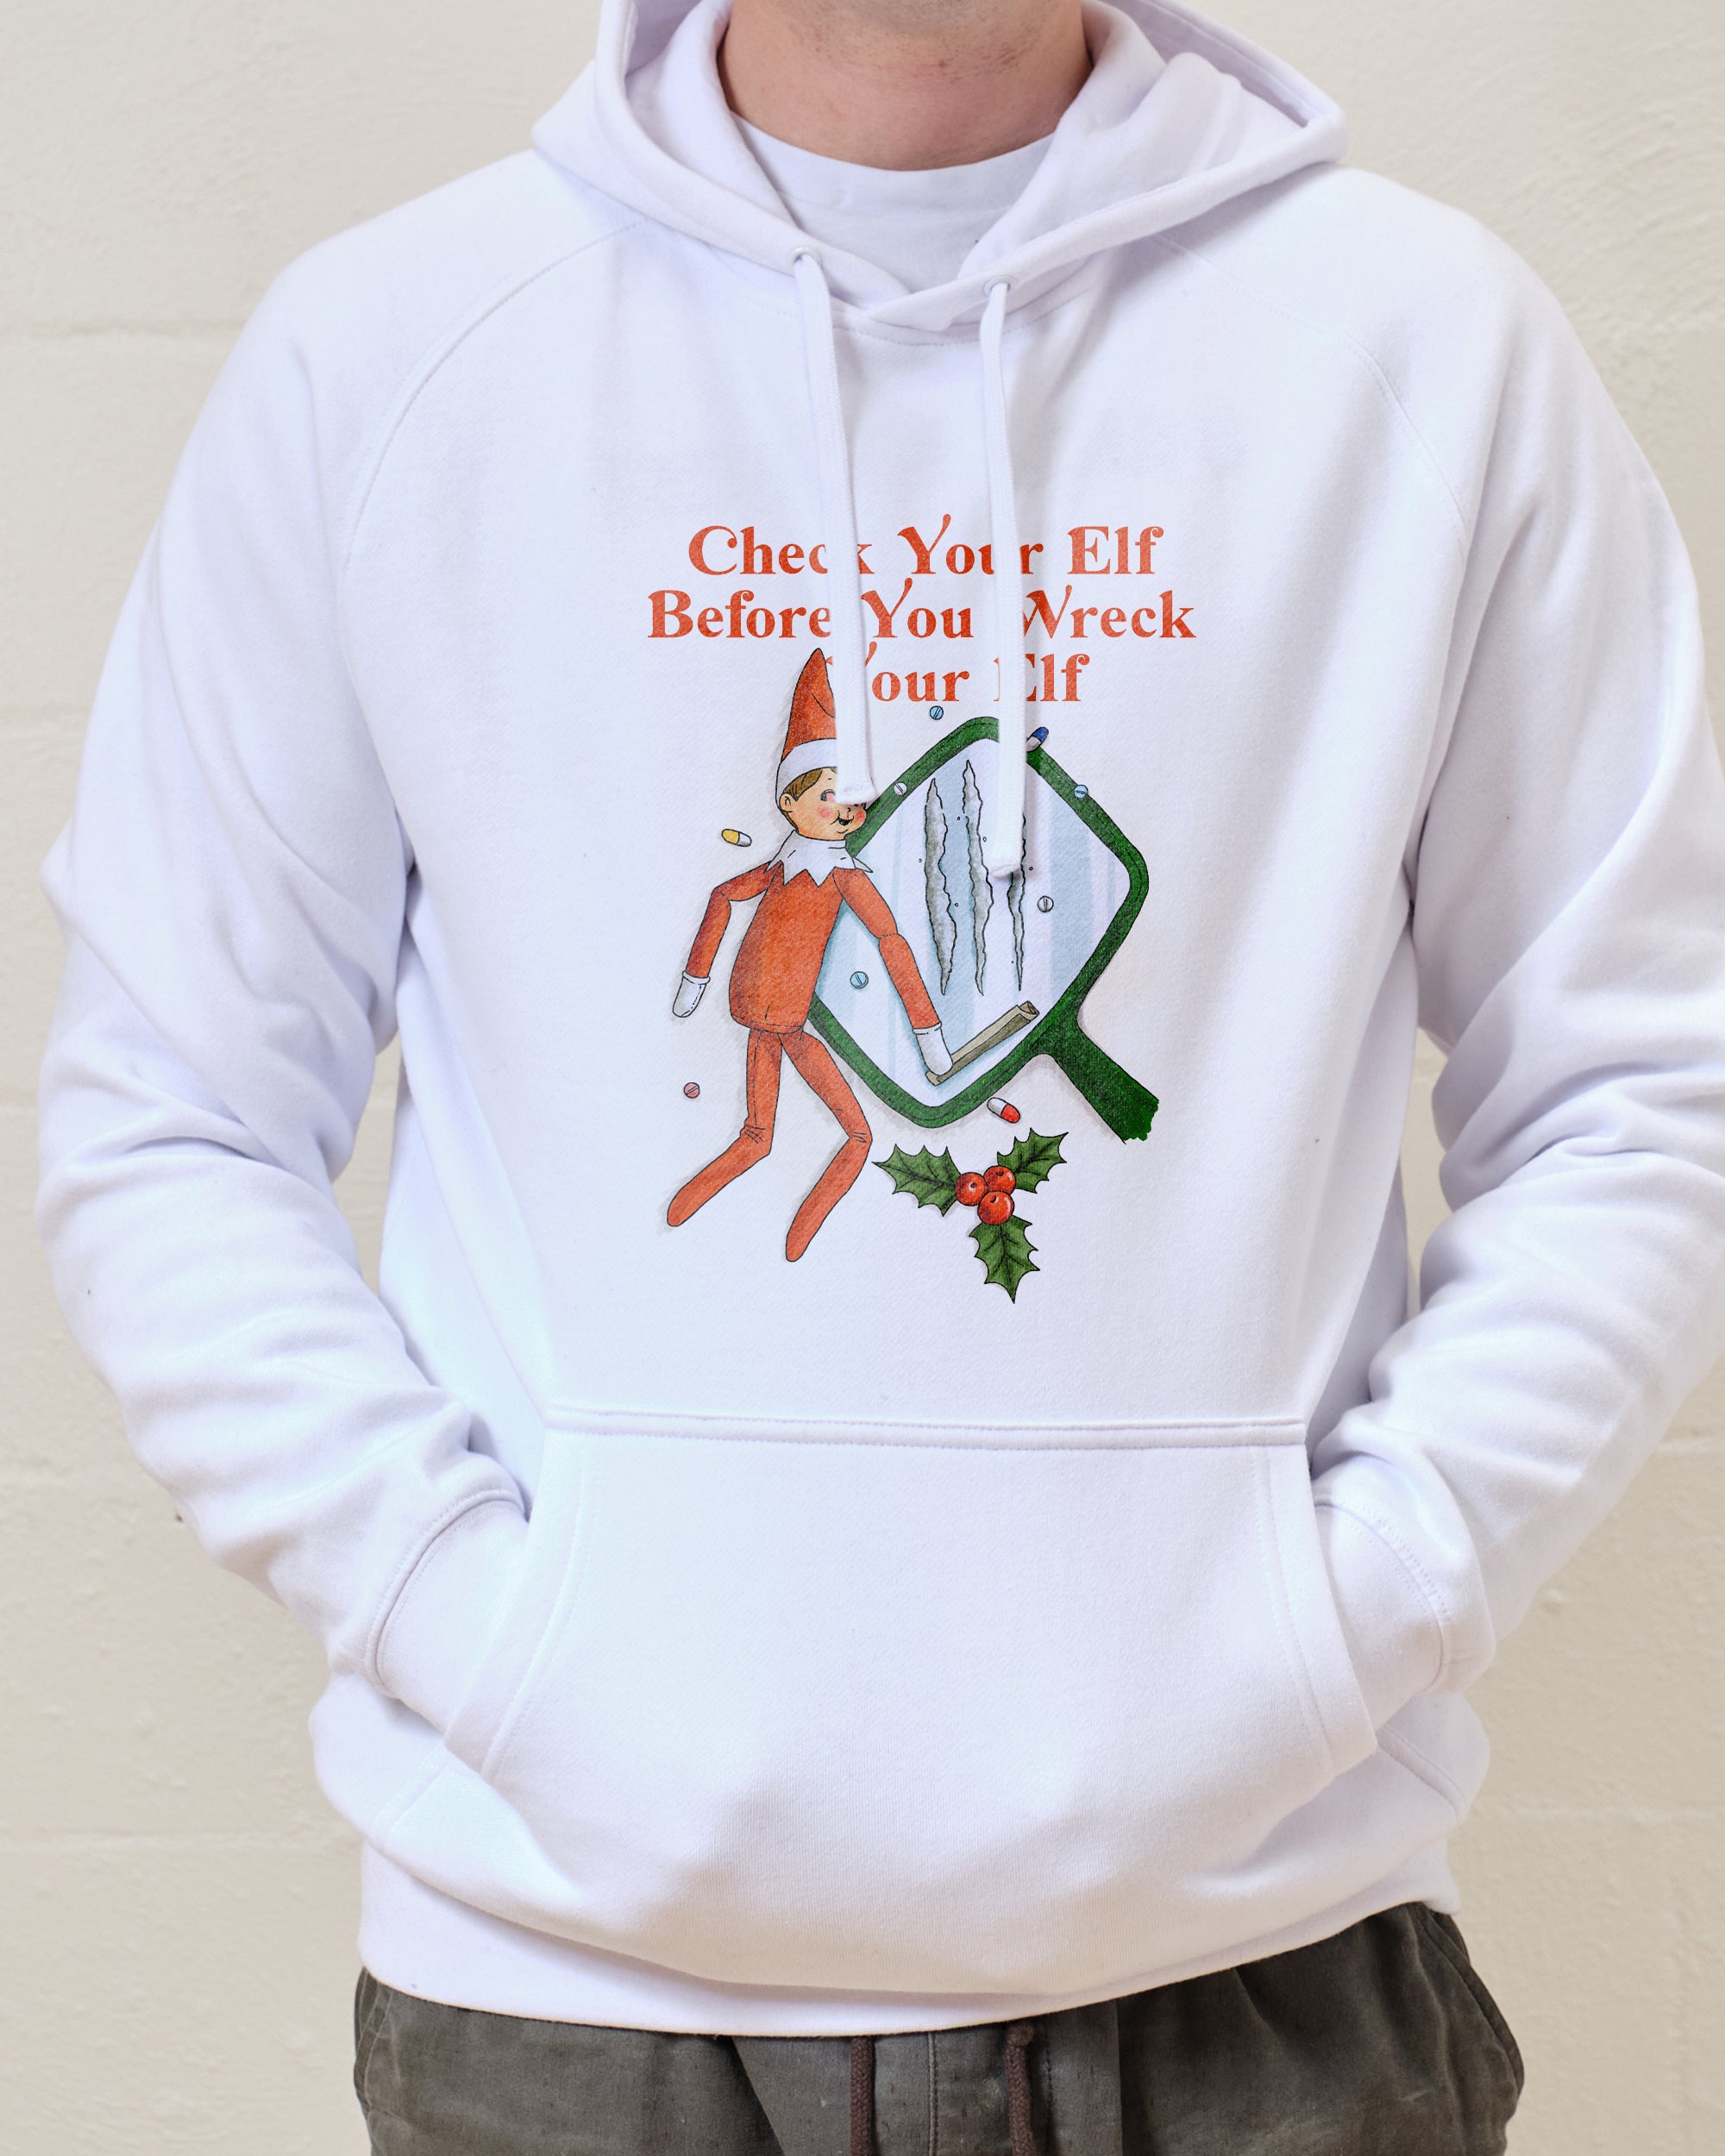 Check your Elf Hoodie Europe Online White